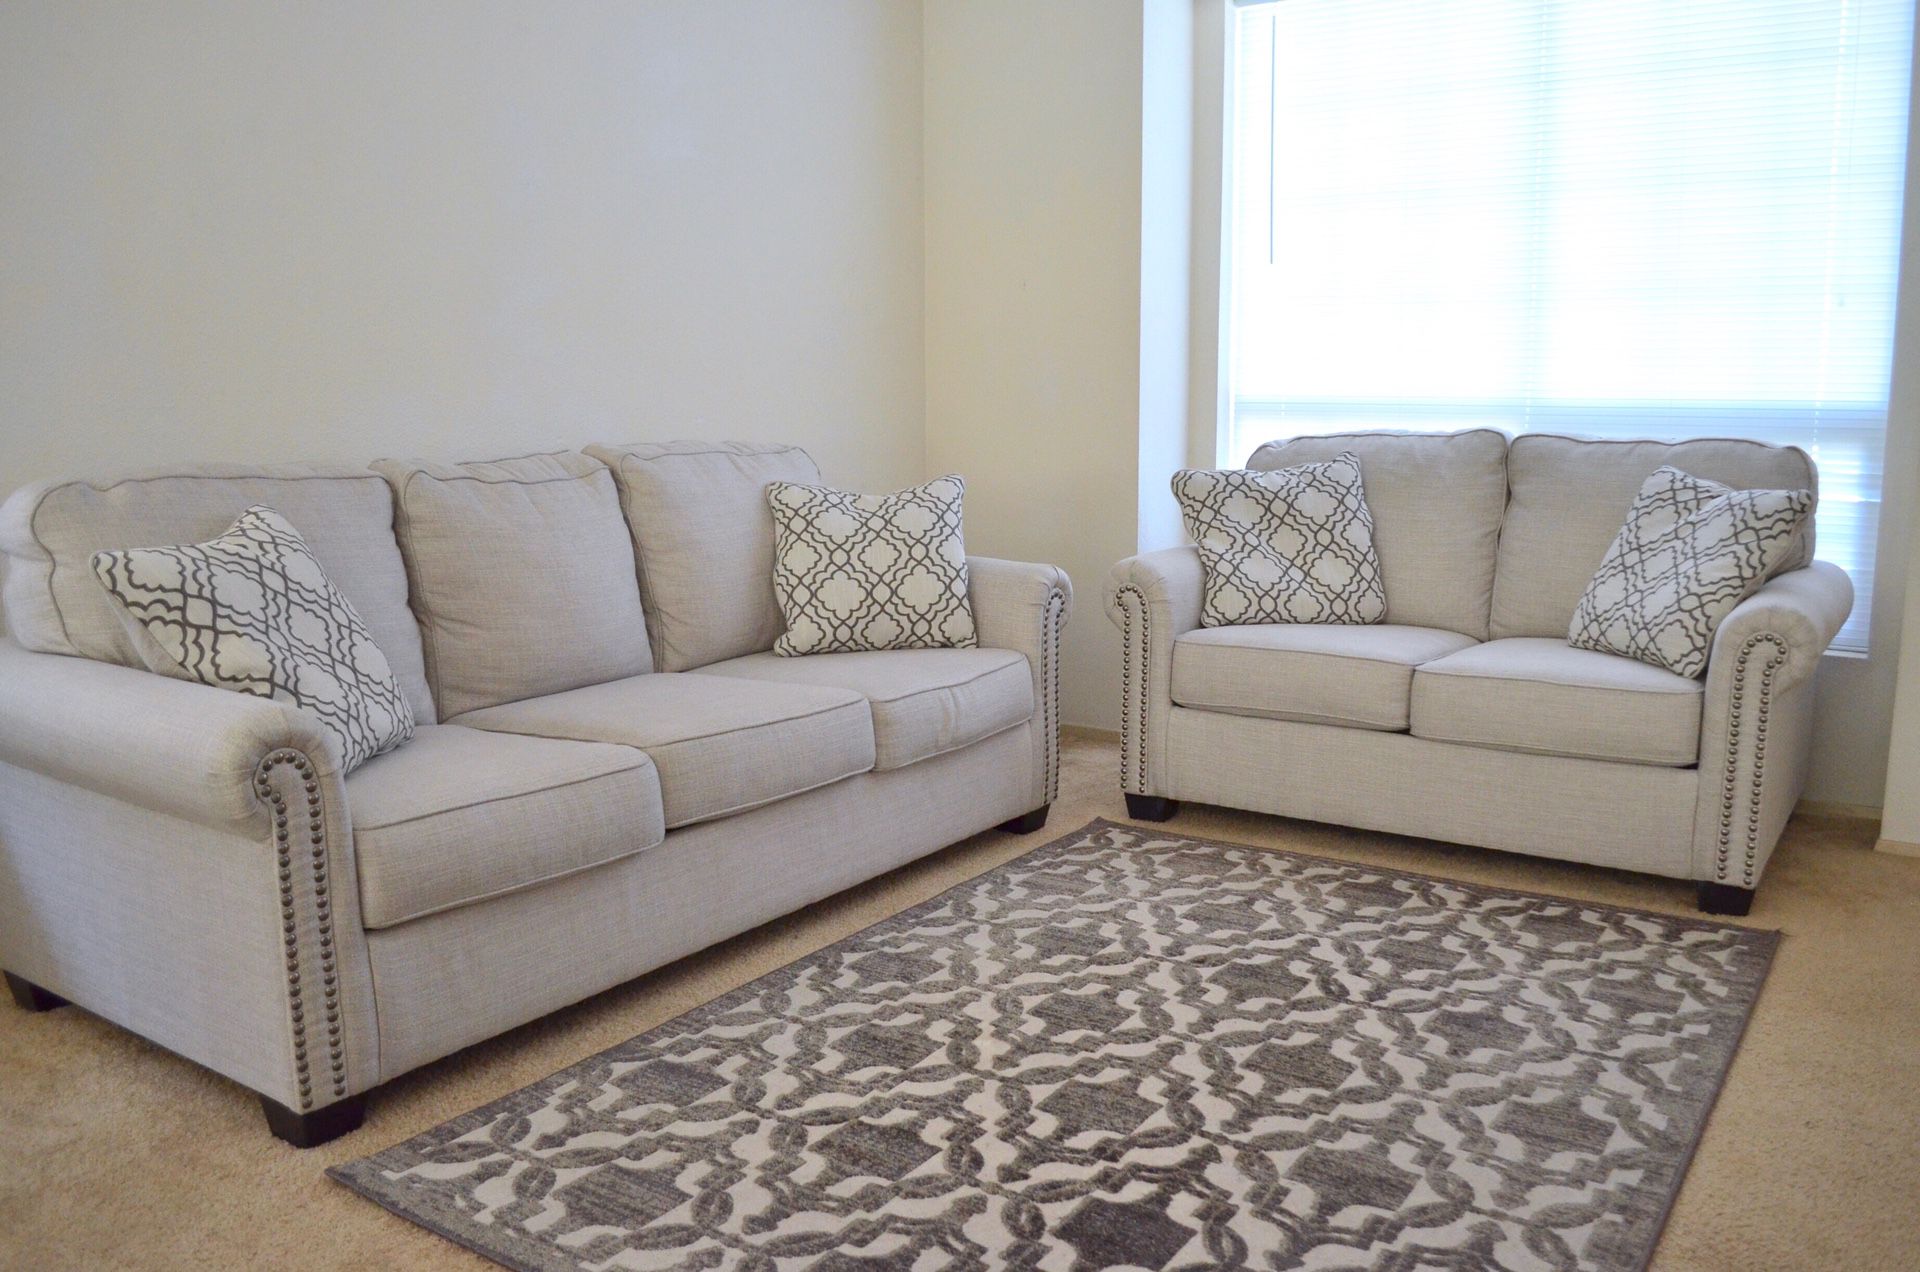 Ashley Furniture Farouh Sofa, Love seat, Accent Pillows and Rug